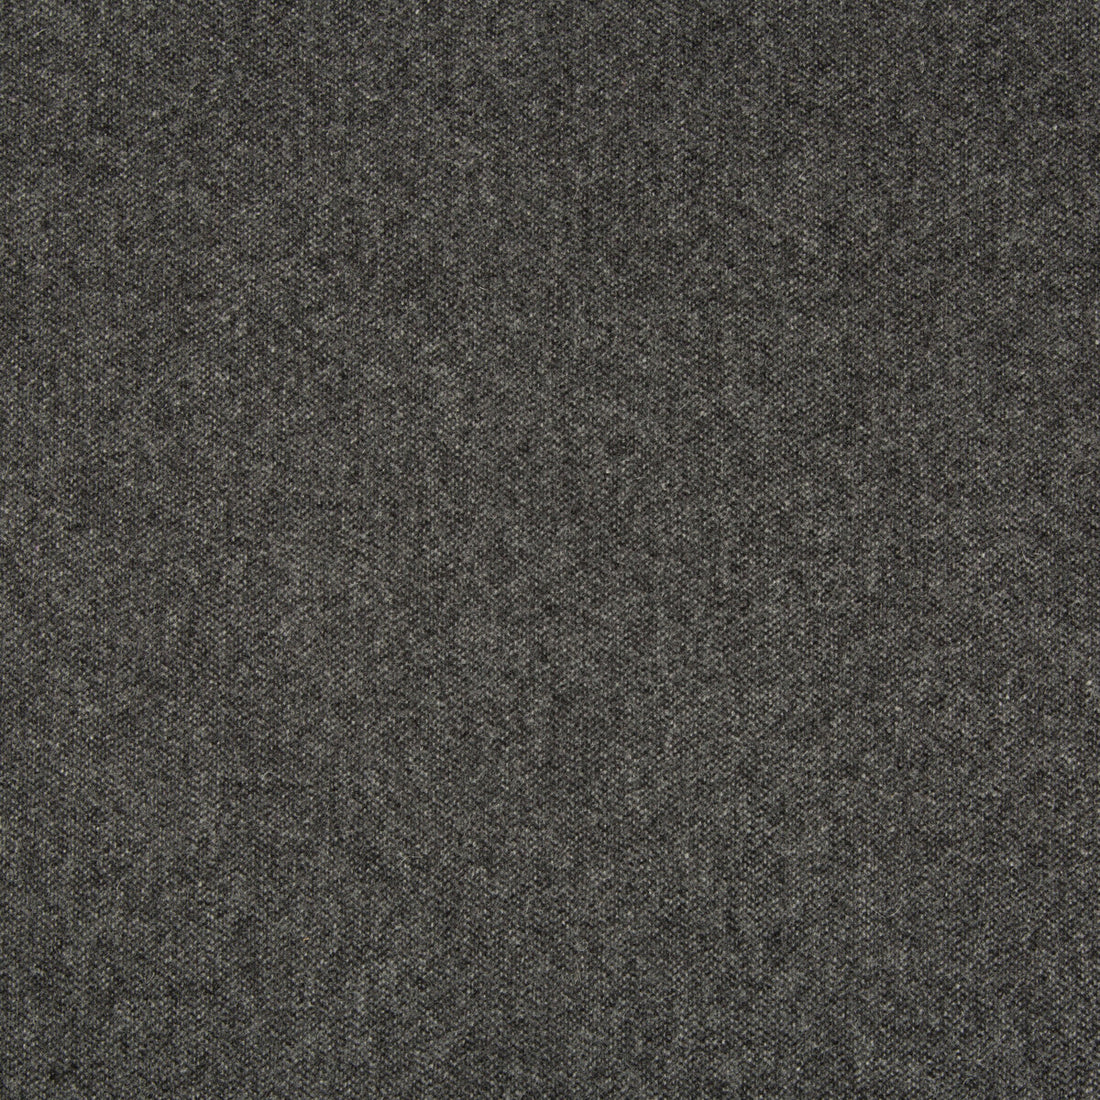 Lucky Suit fabric in charcoal color - pattern 34903.21.0 - by Kravet Couture in the Modern Tailor collection